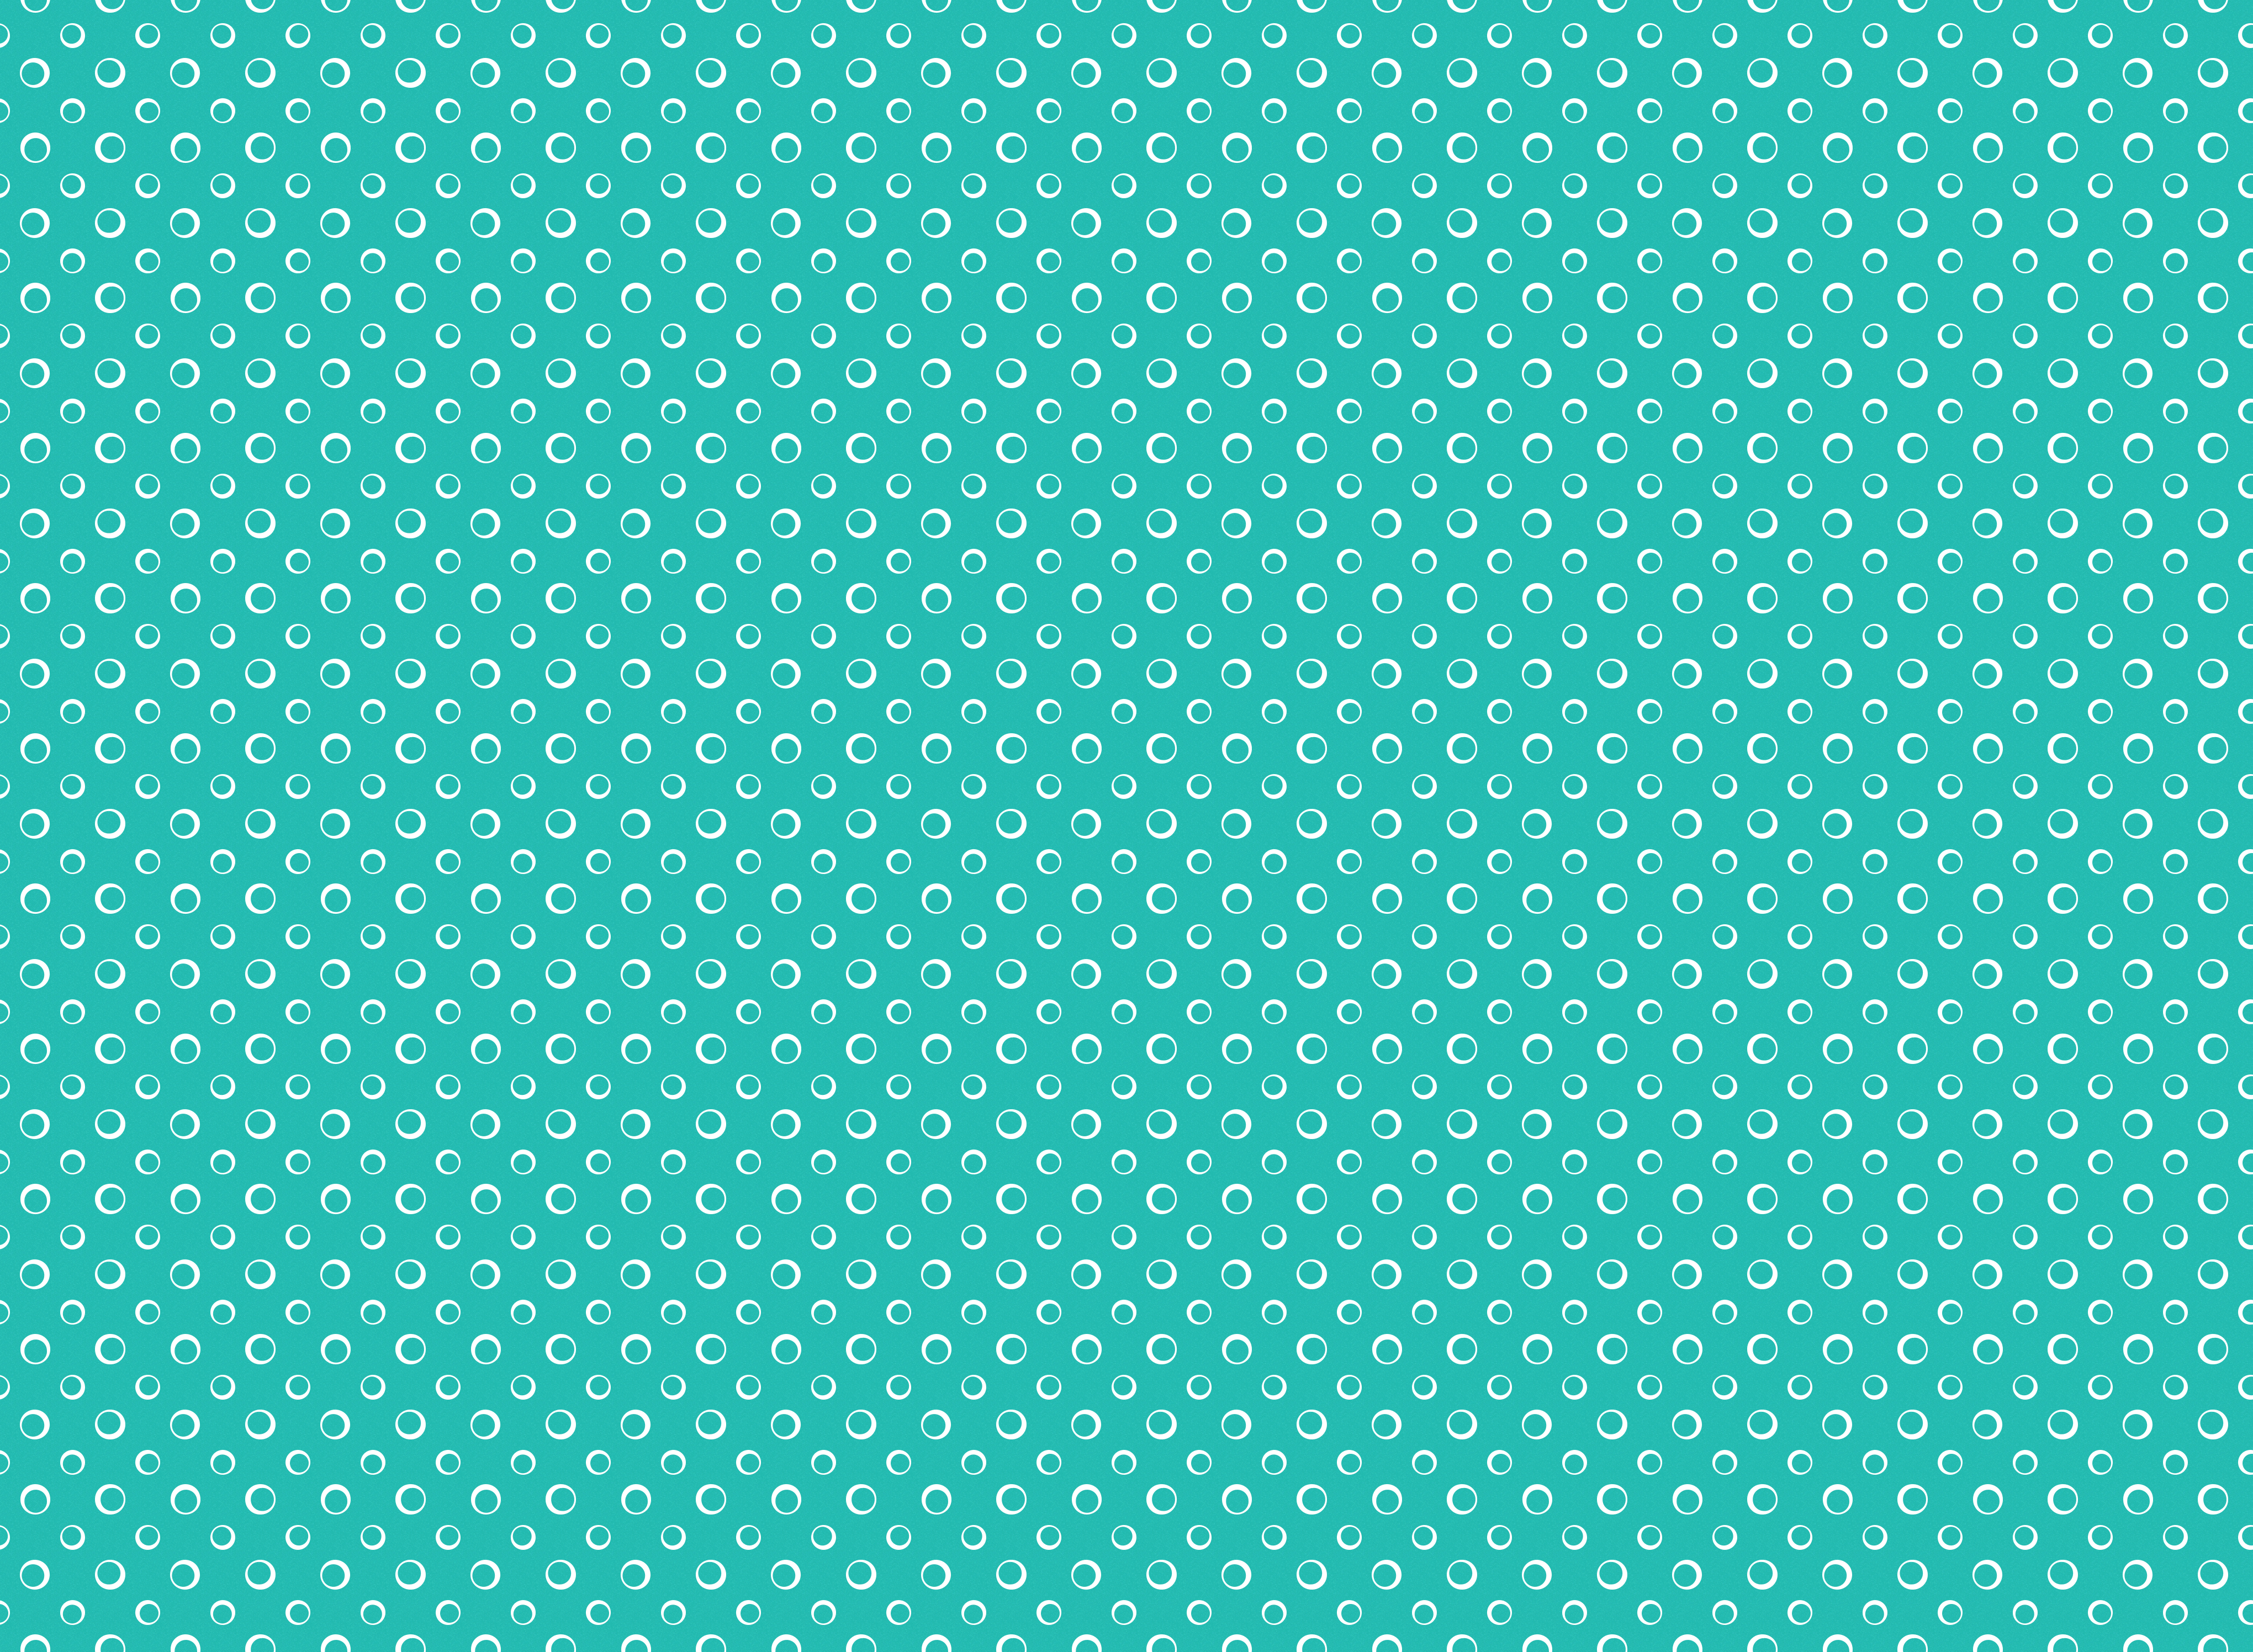 Turquoise Rings Pattern Psdgraphics